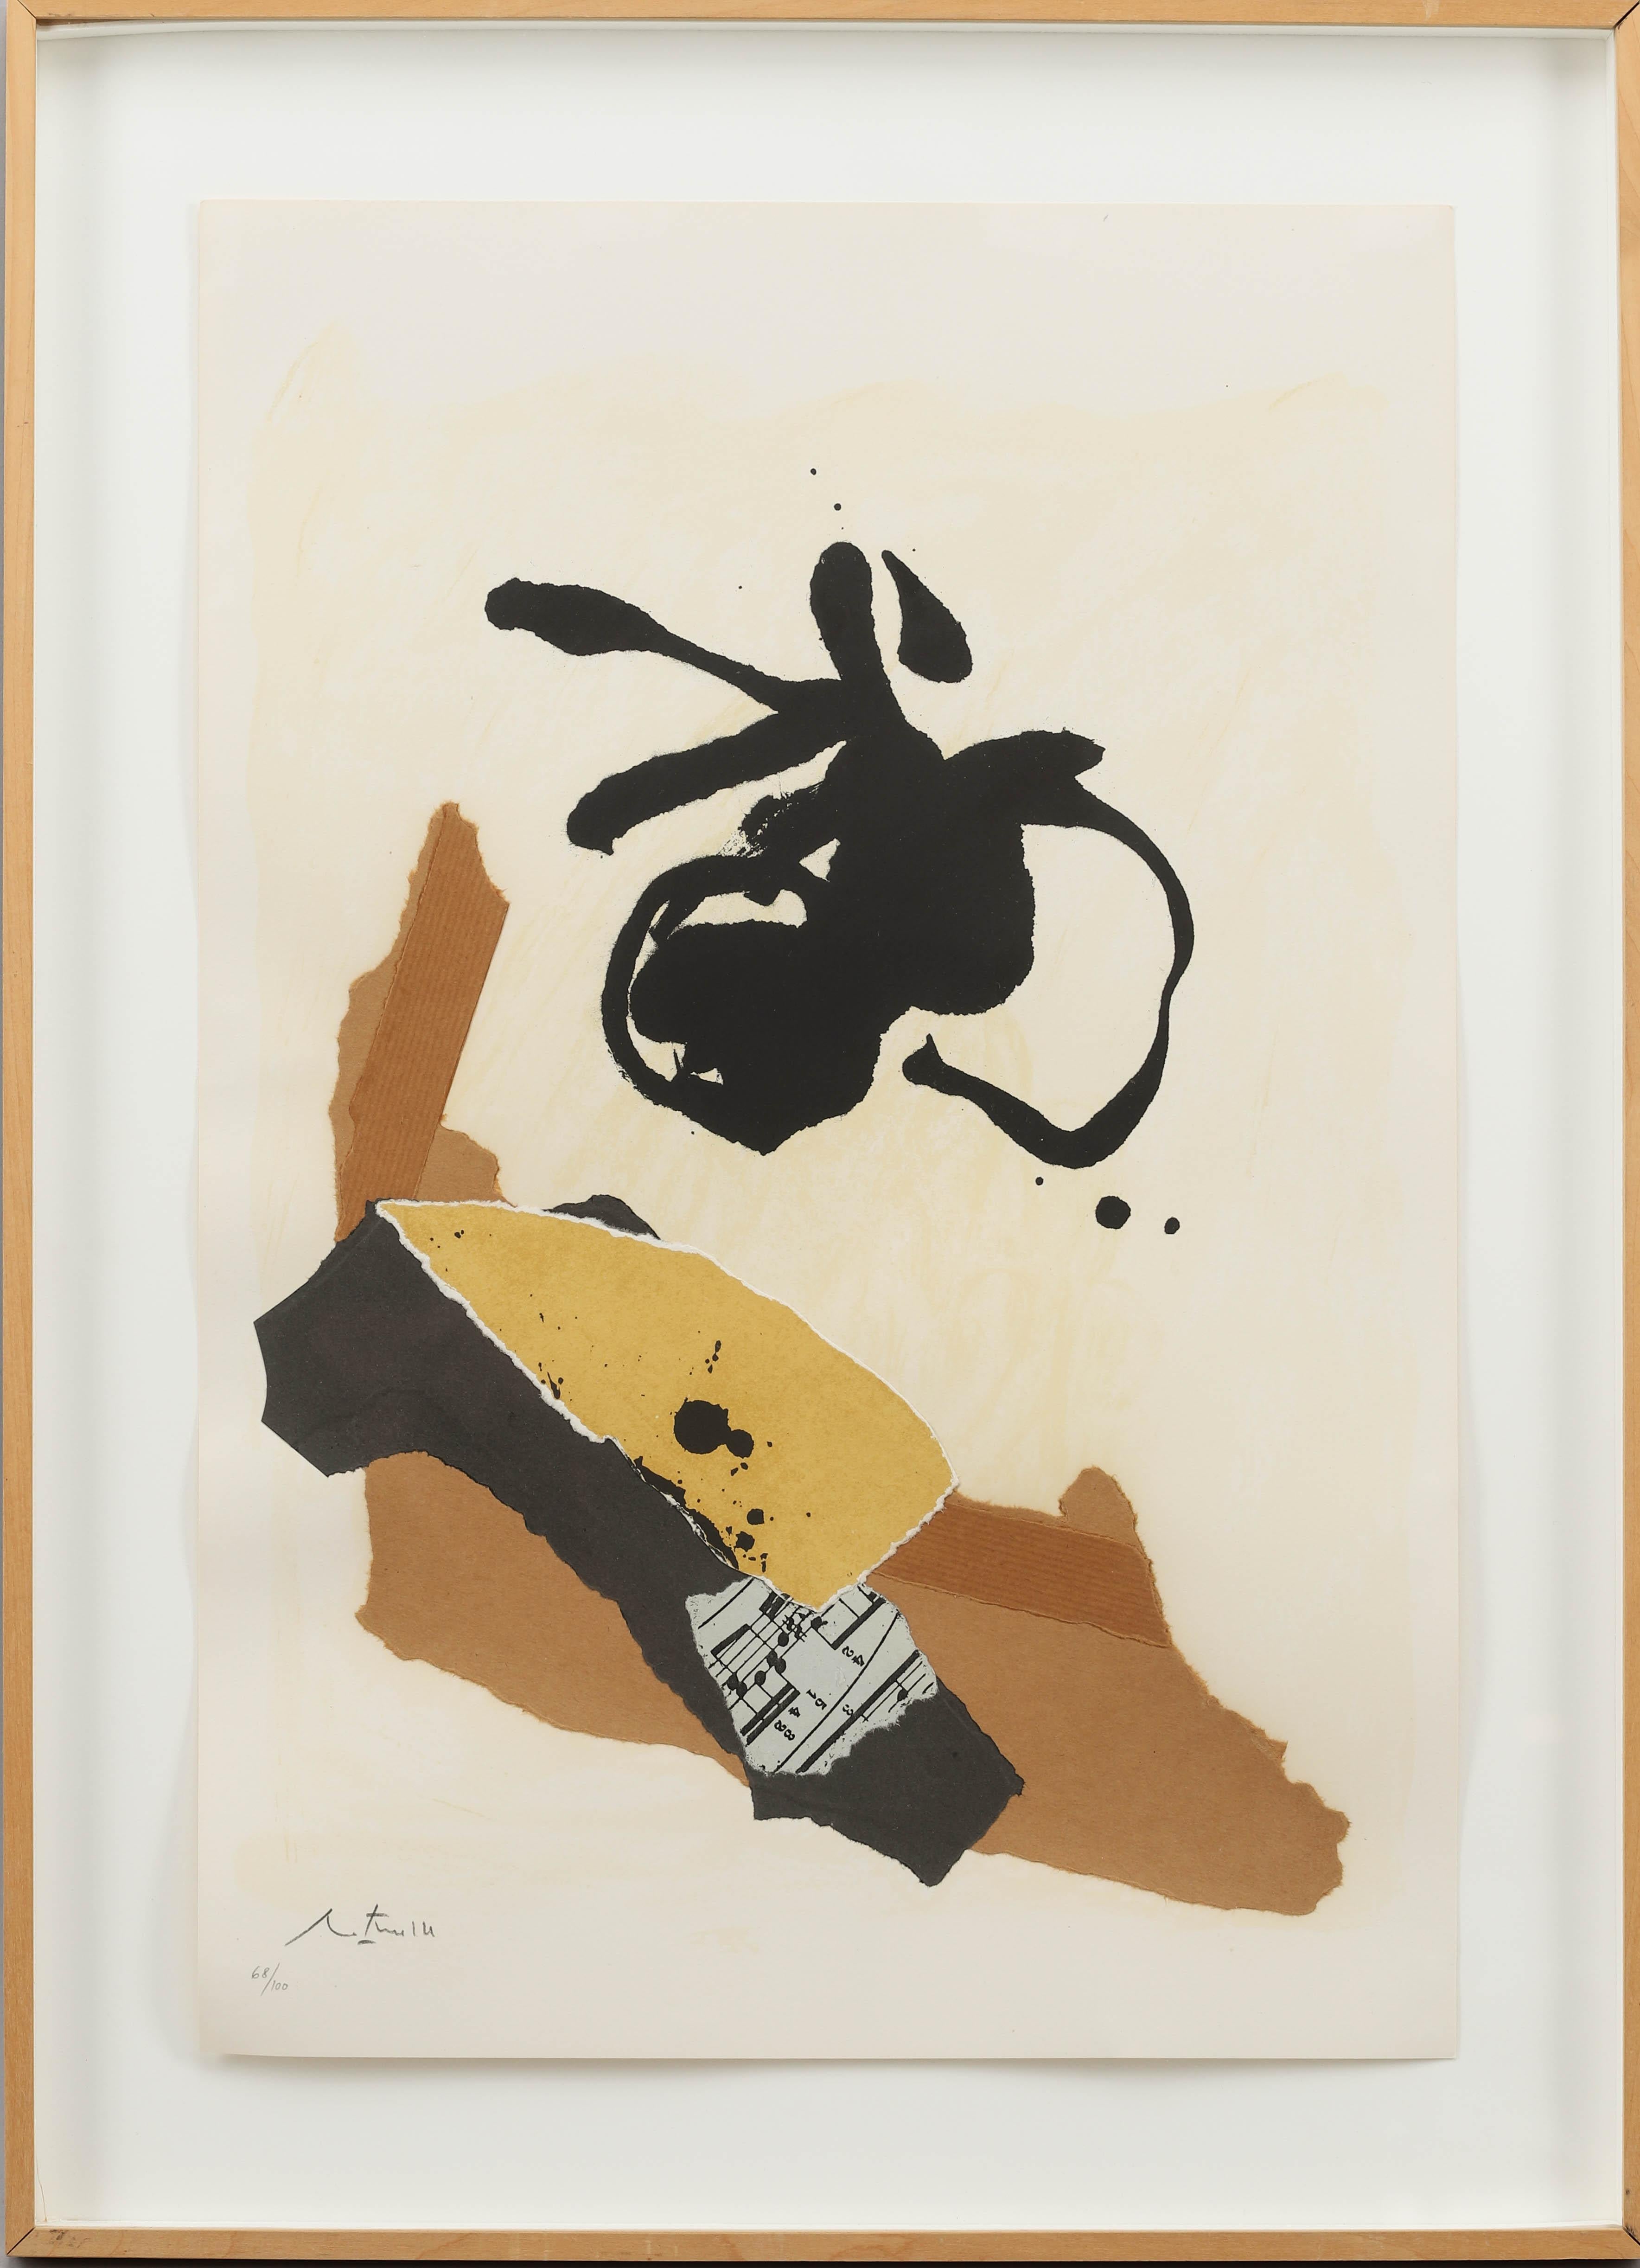 Robert Motherwell Abstract Print - Abstract Gesture Expresionism Collage New York Motherwell Black Musical Modern